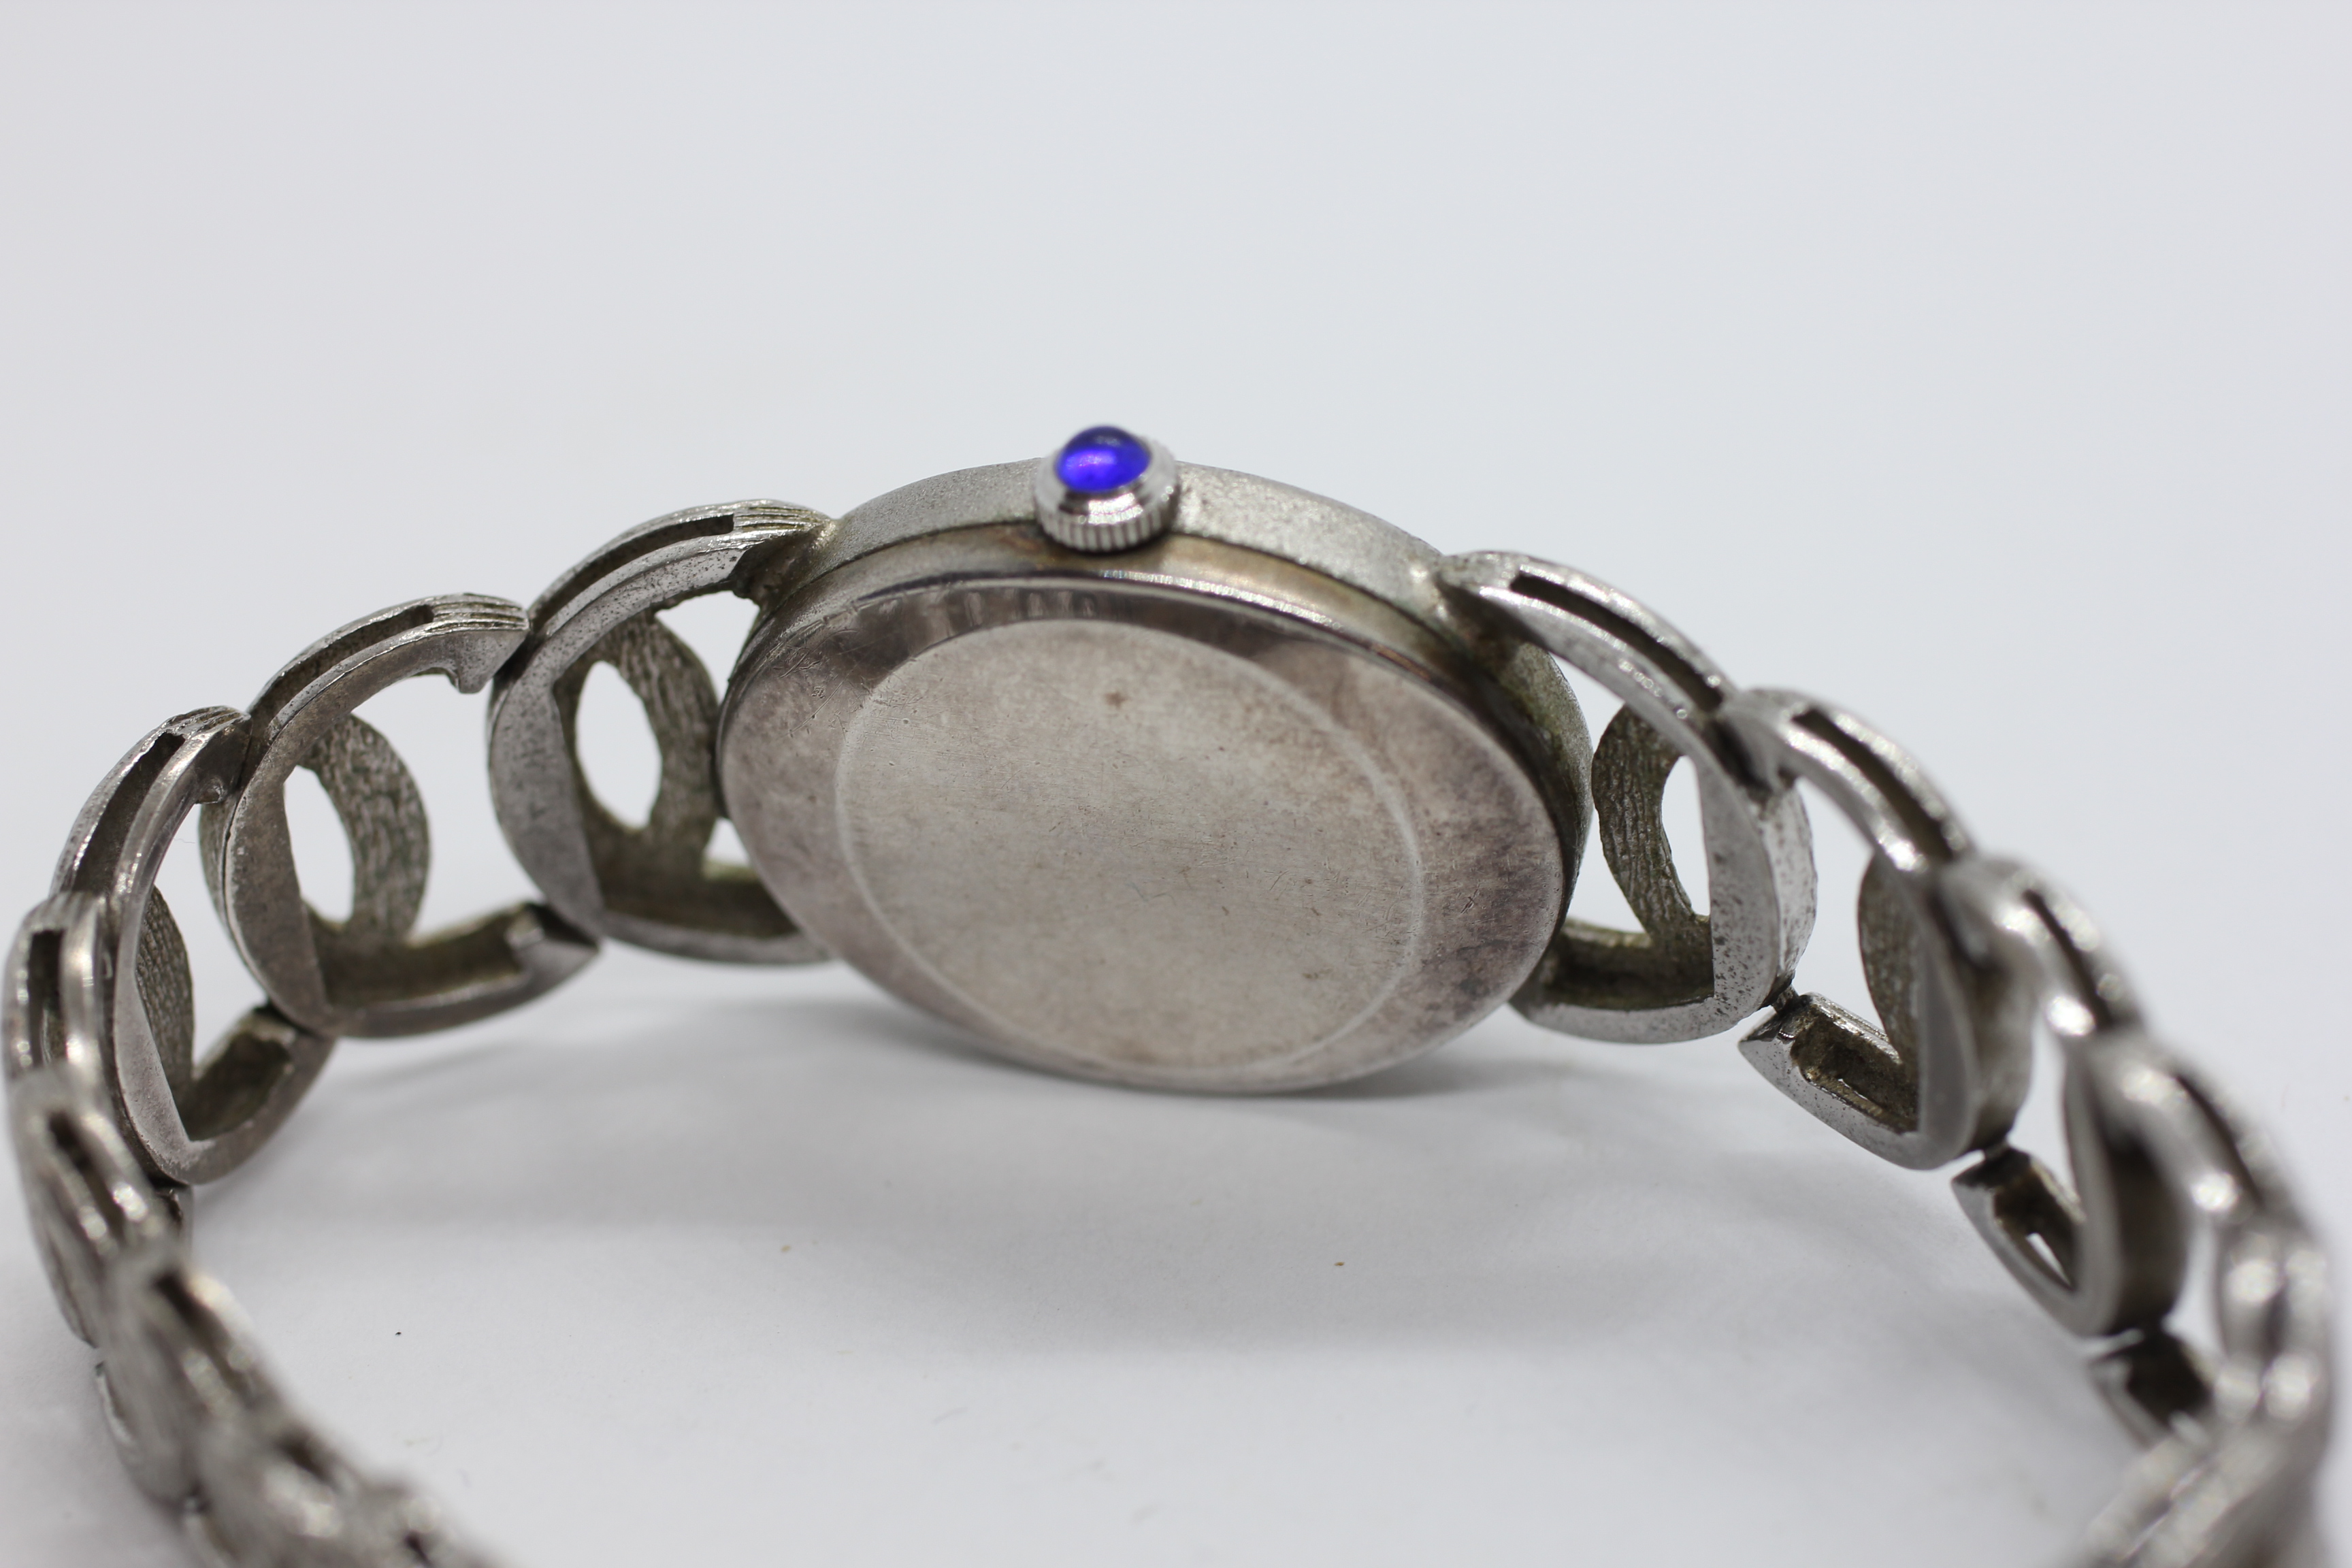 A LADIES SILVER ROTARY WRIST WATCH ON LINKED BRACELET. - Image 7 of 9